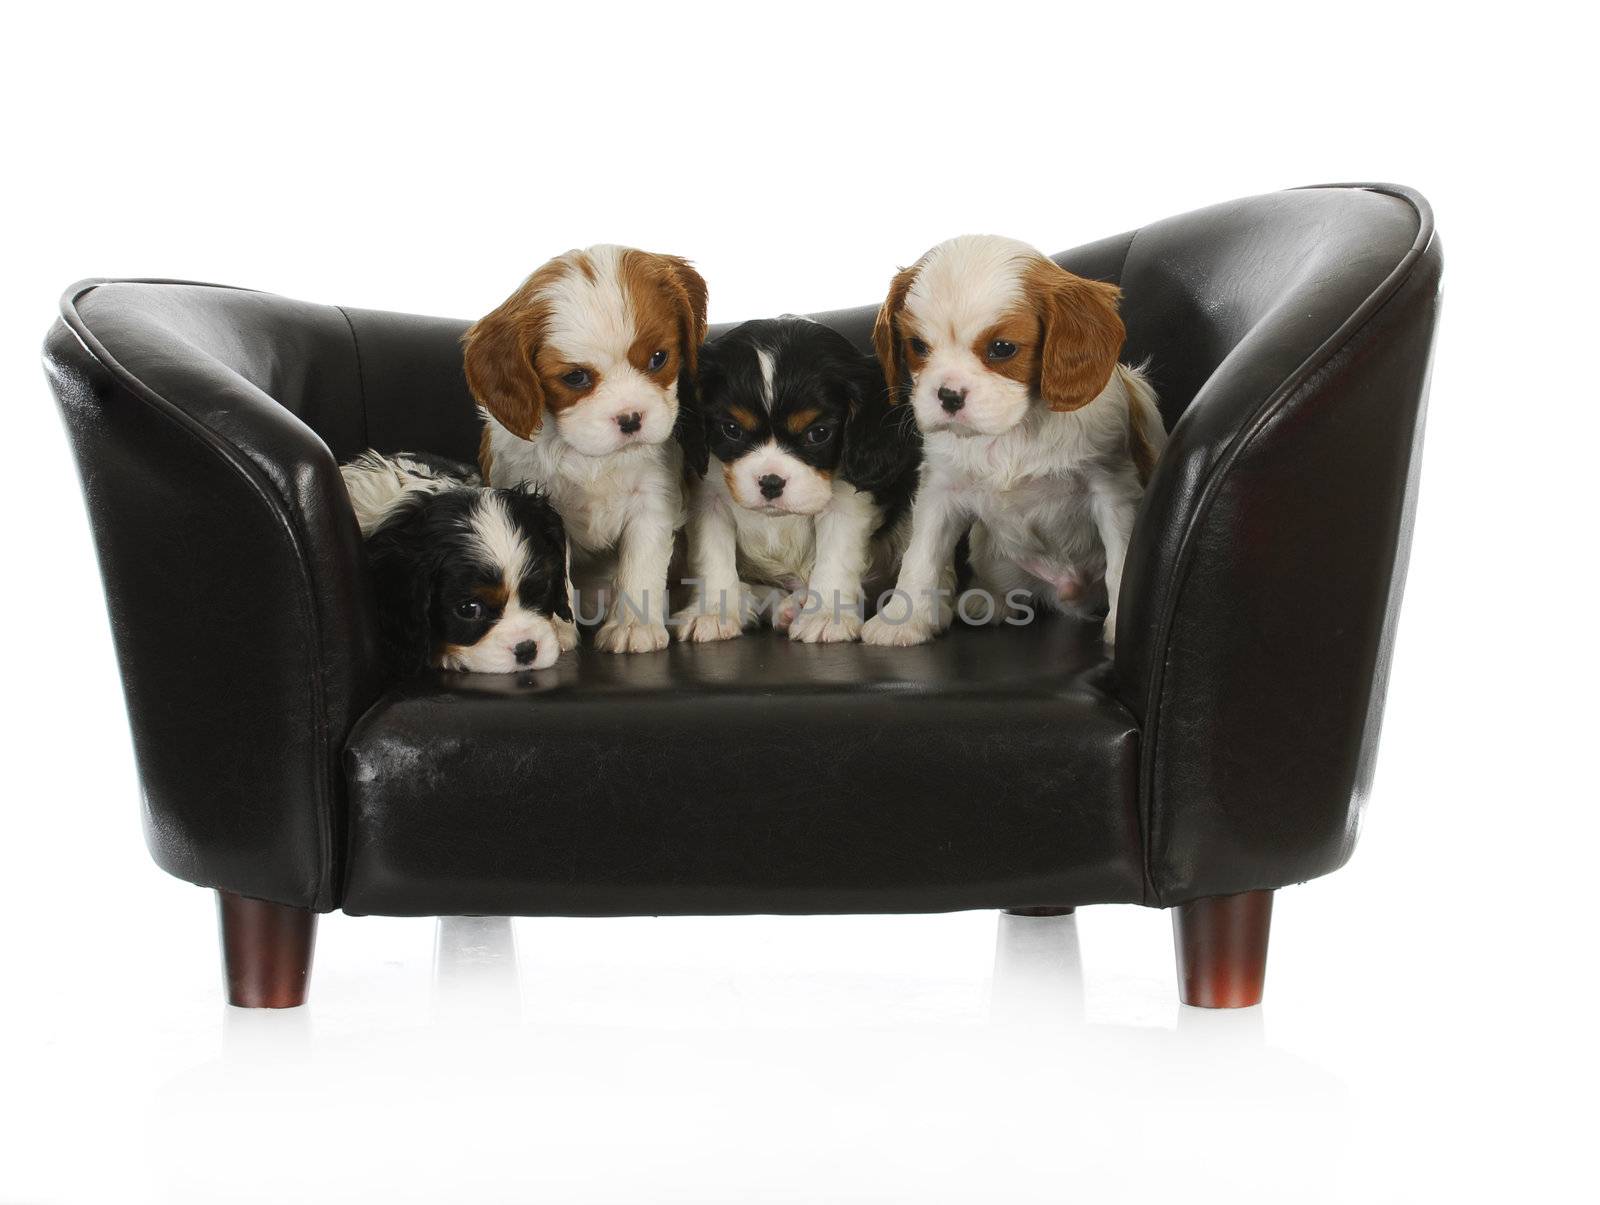 cute puppies - litter of cavalier king charles spaniel puppies sitting on a dog couch